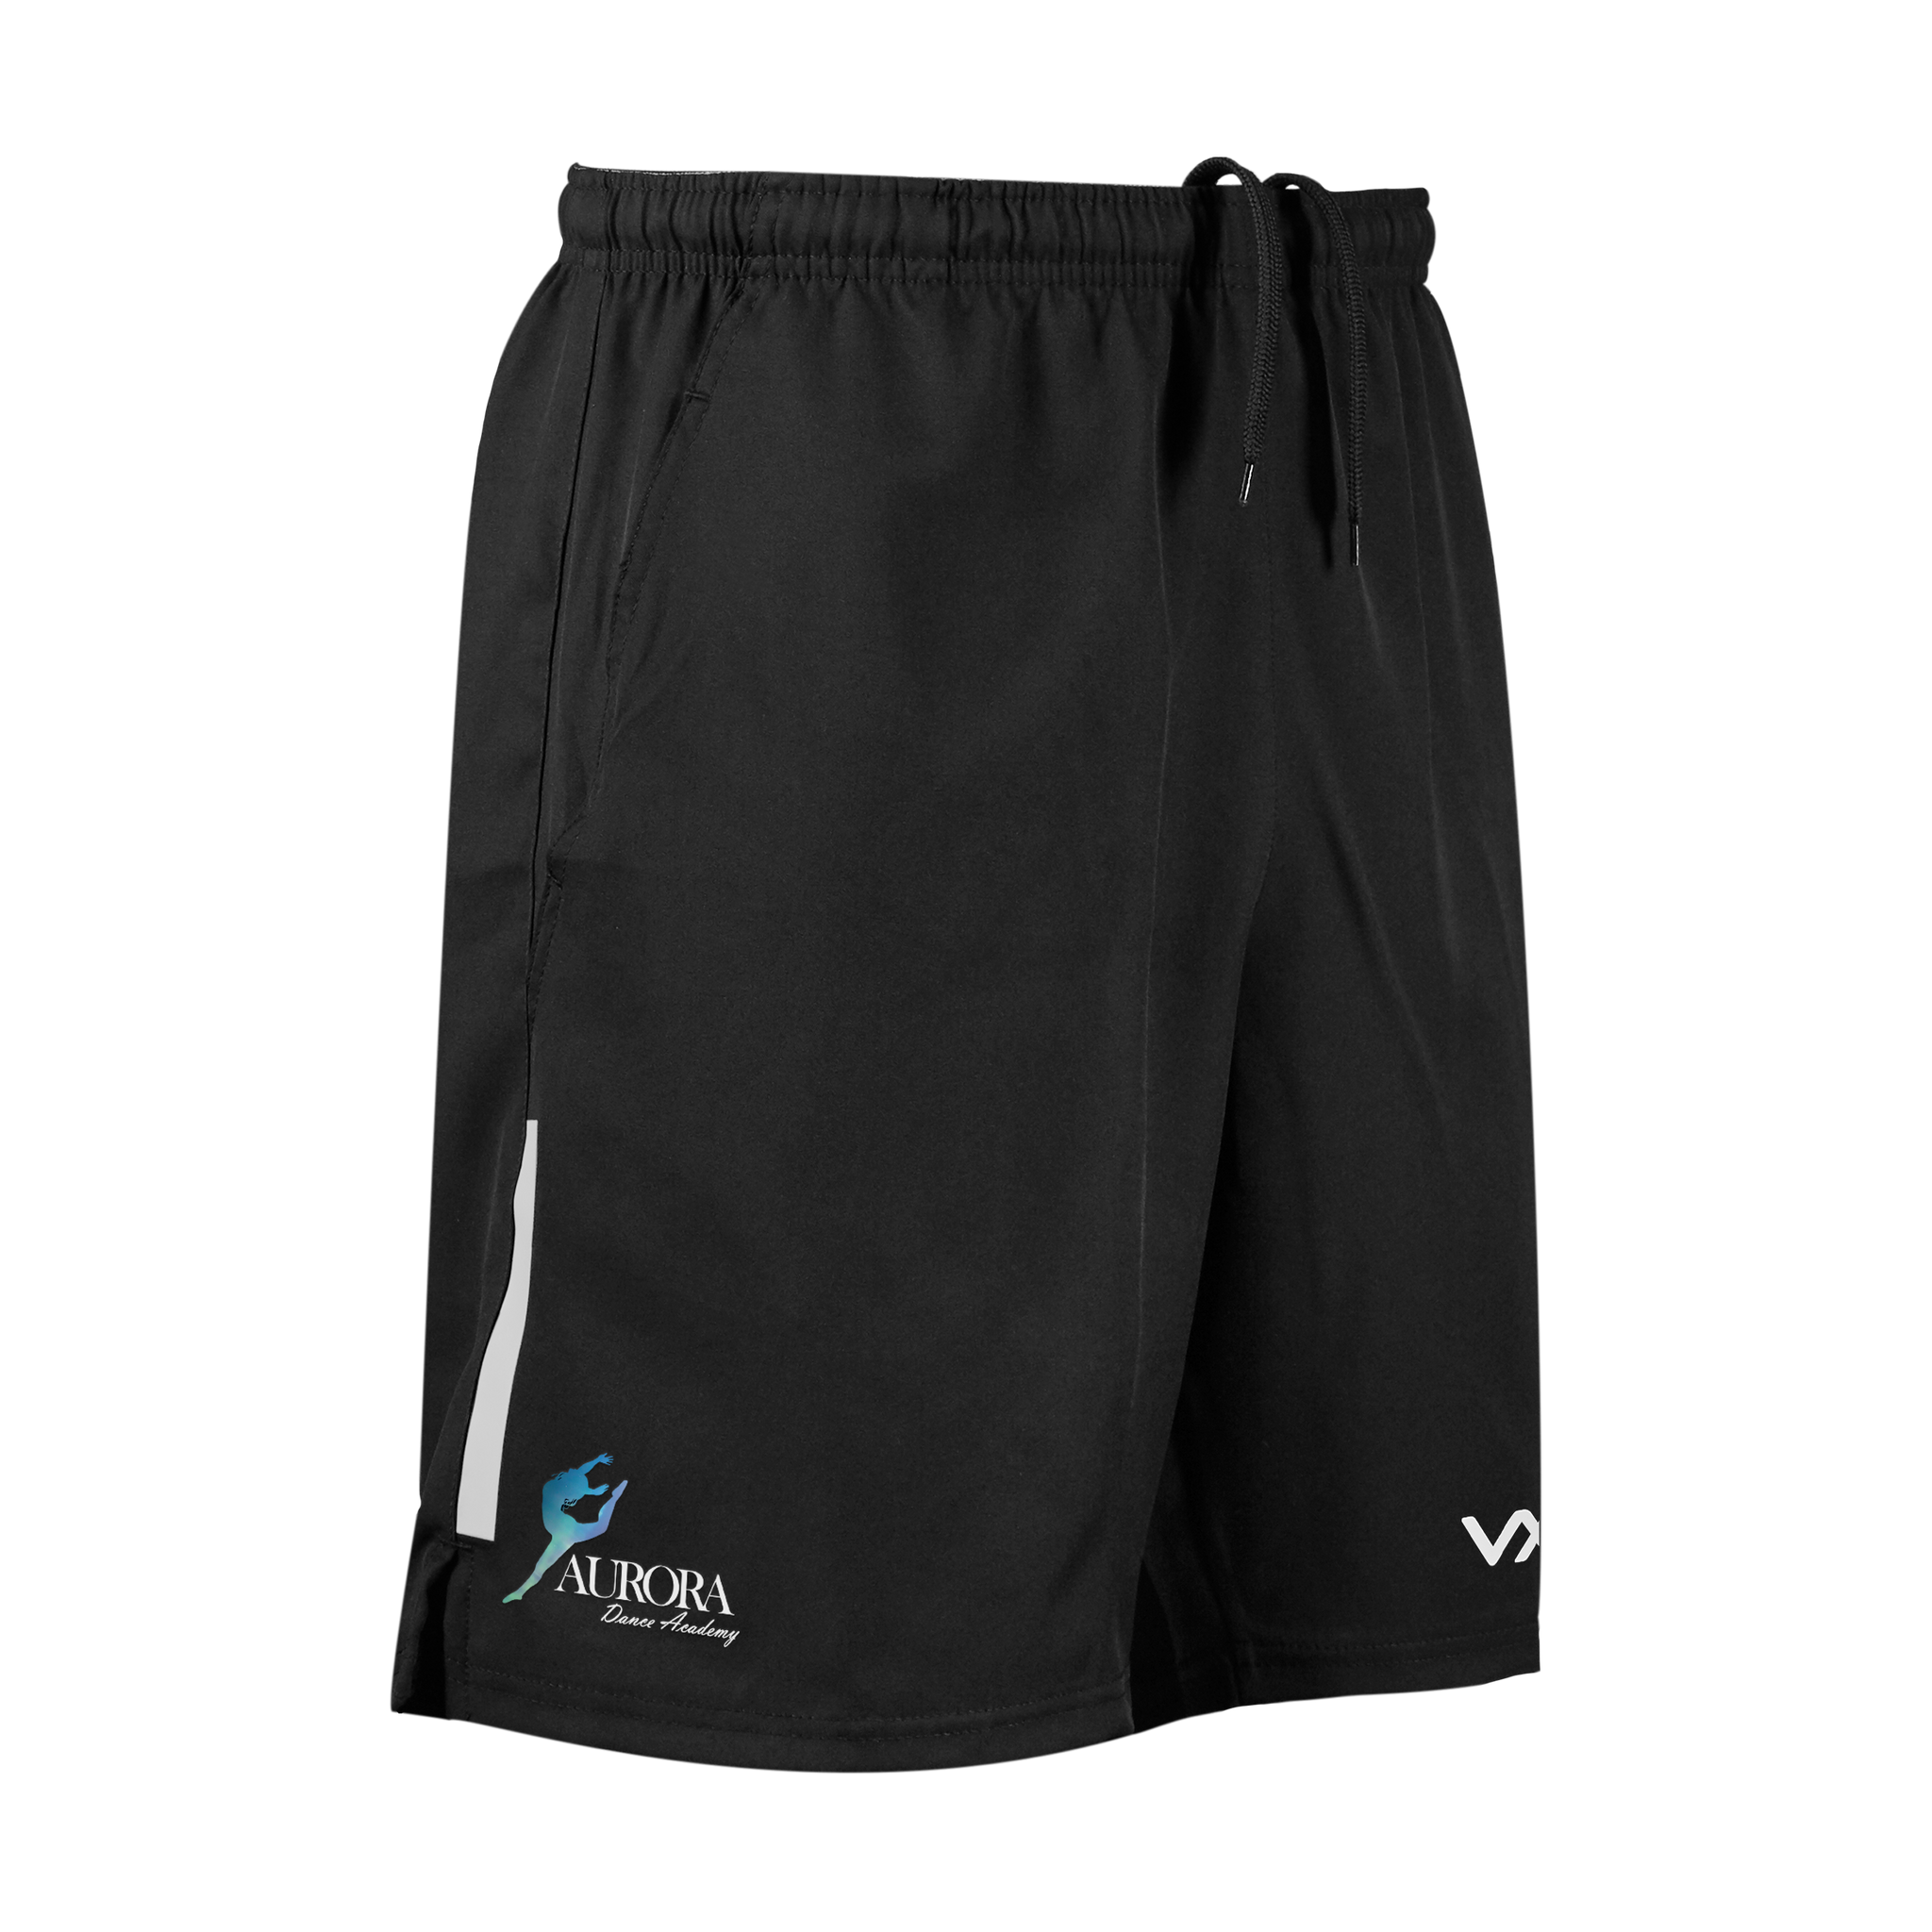 Aurora Dance Academy Fortis Youth Travel Shorts